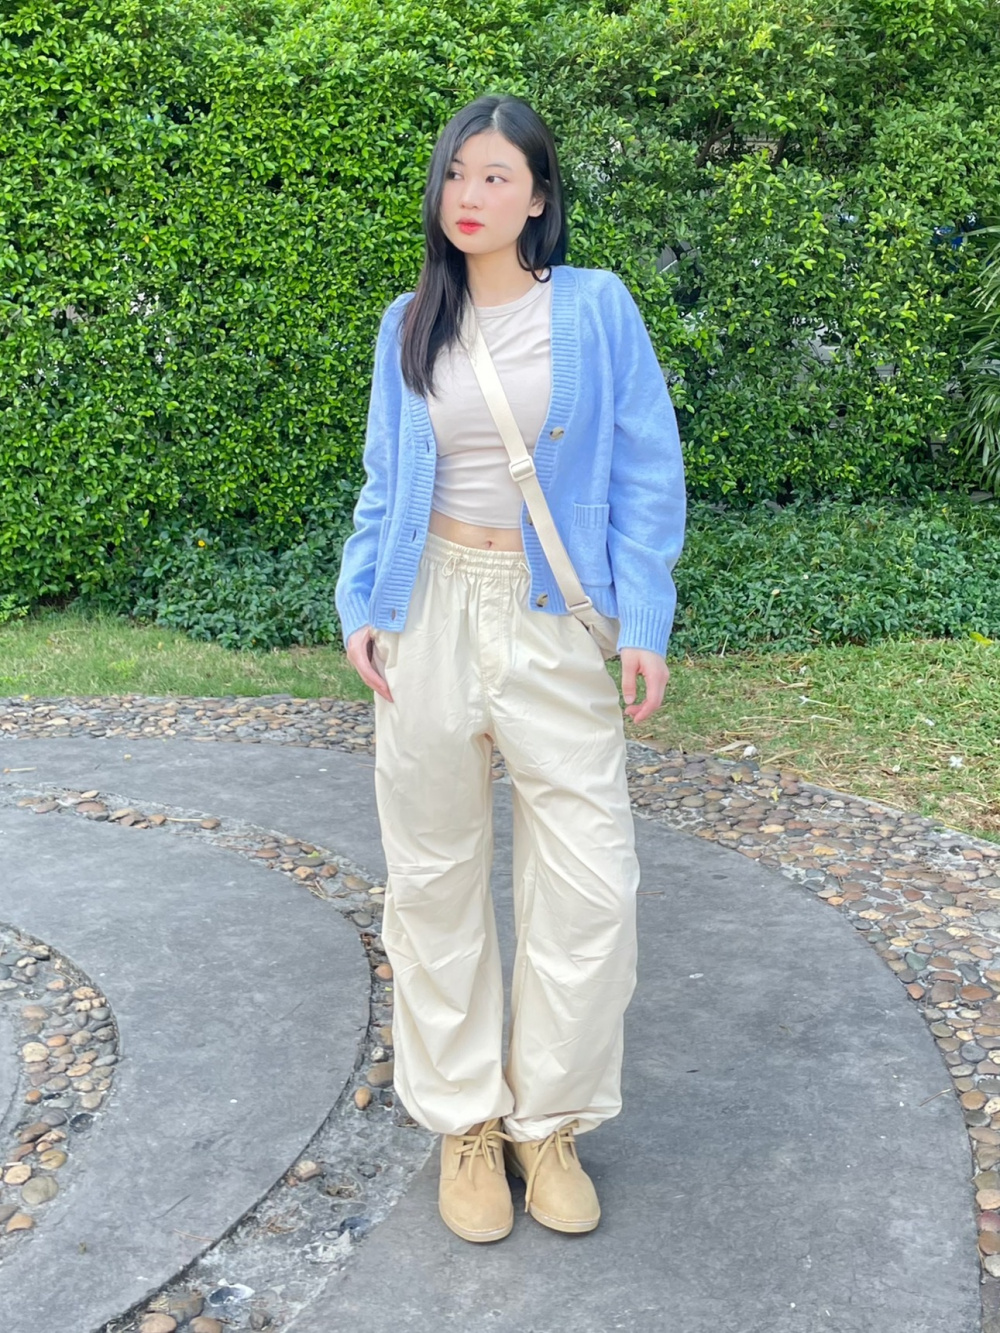 Check styling ideas for「Knitted Short Jacket、Parachute Pants」